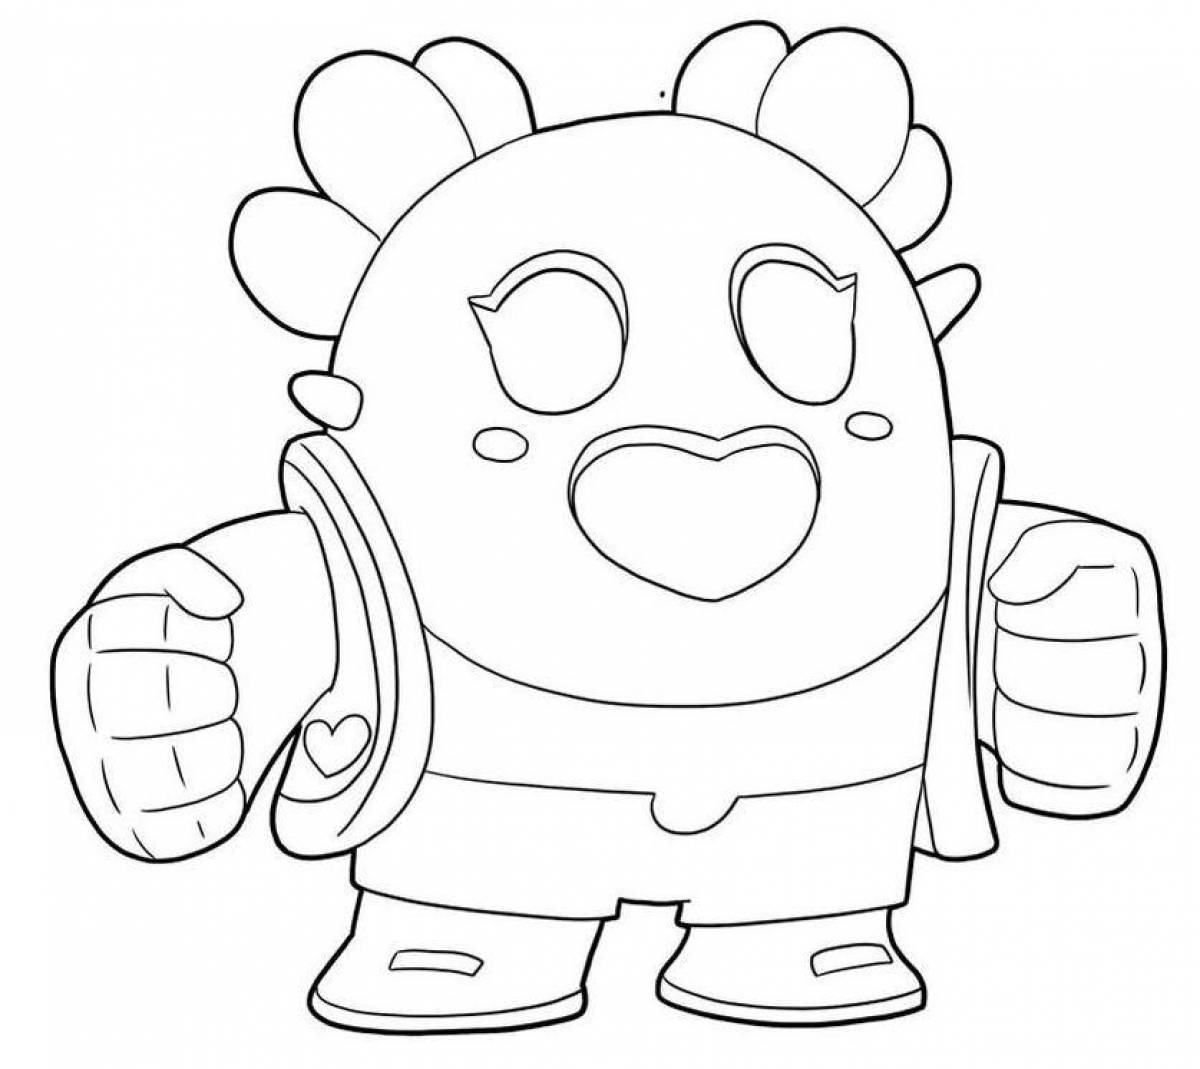 Detailed brawl stars pins coloring page